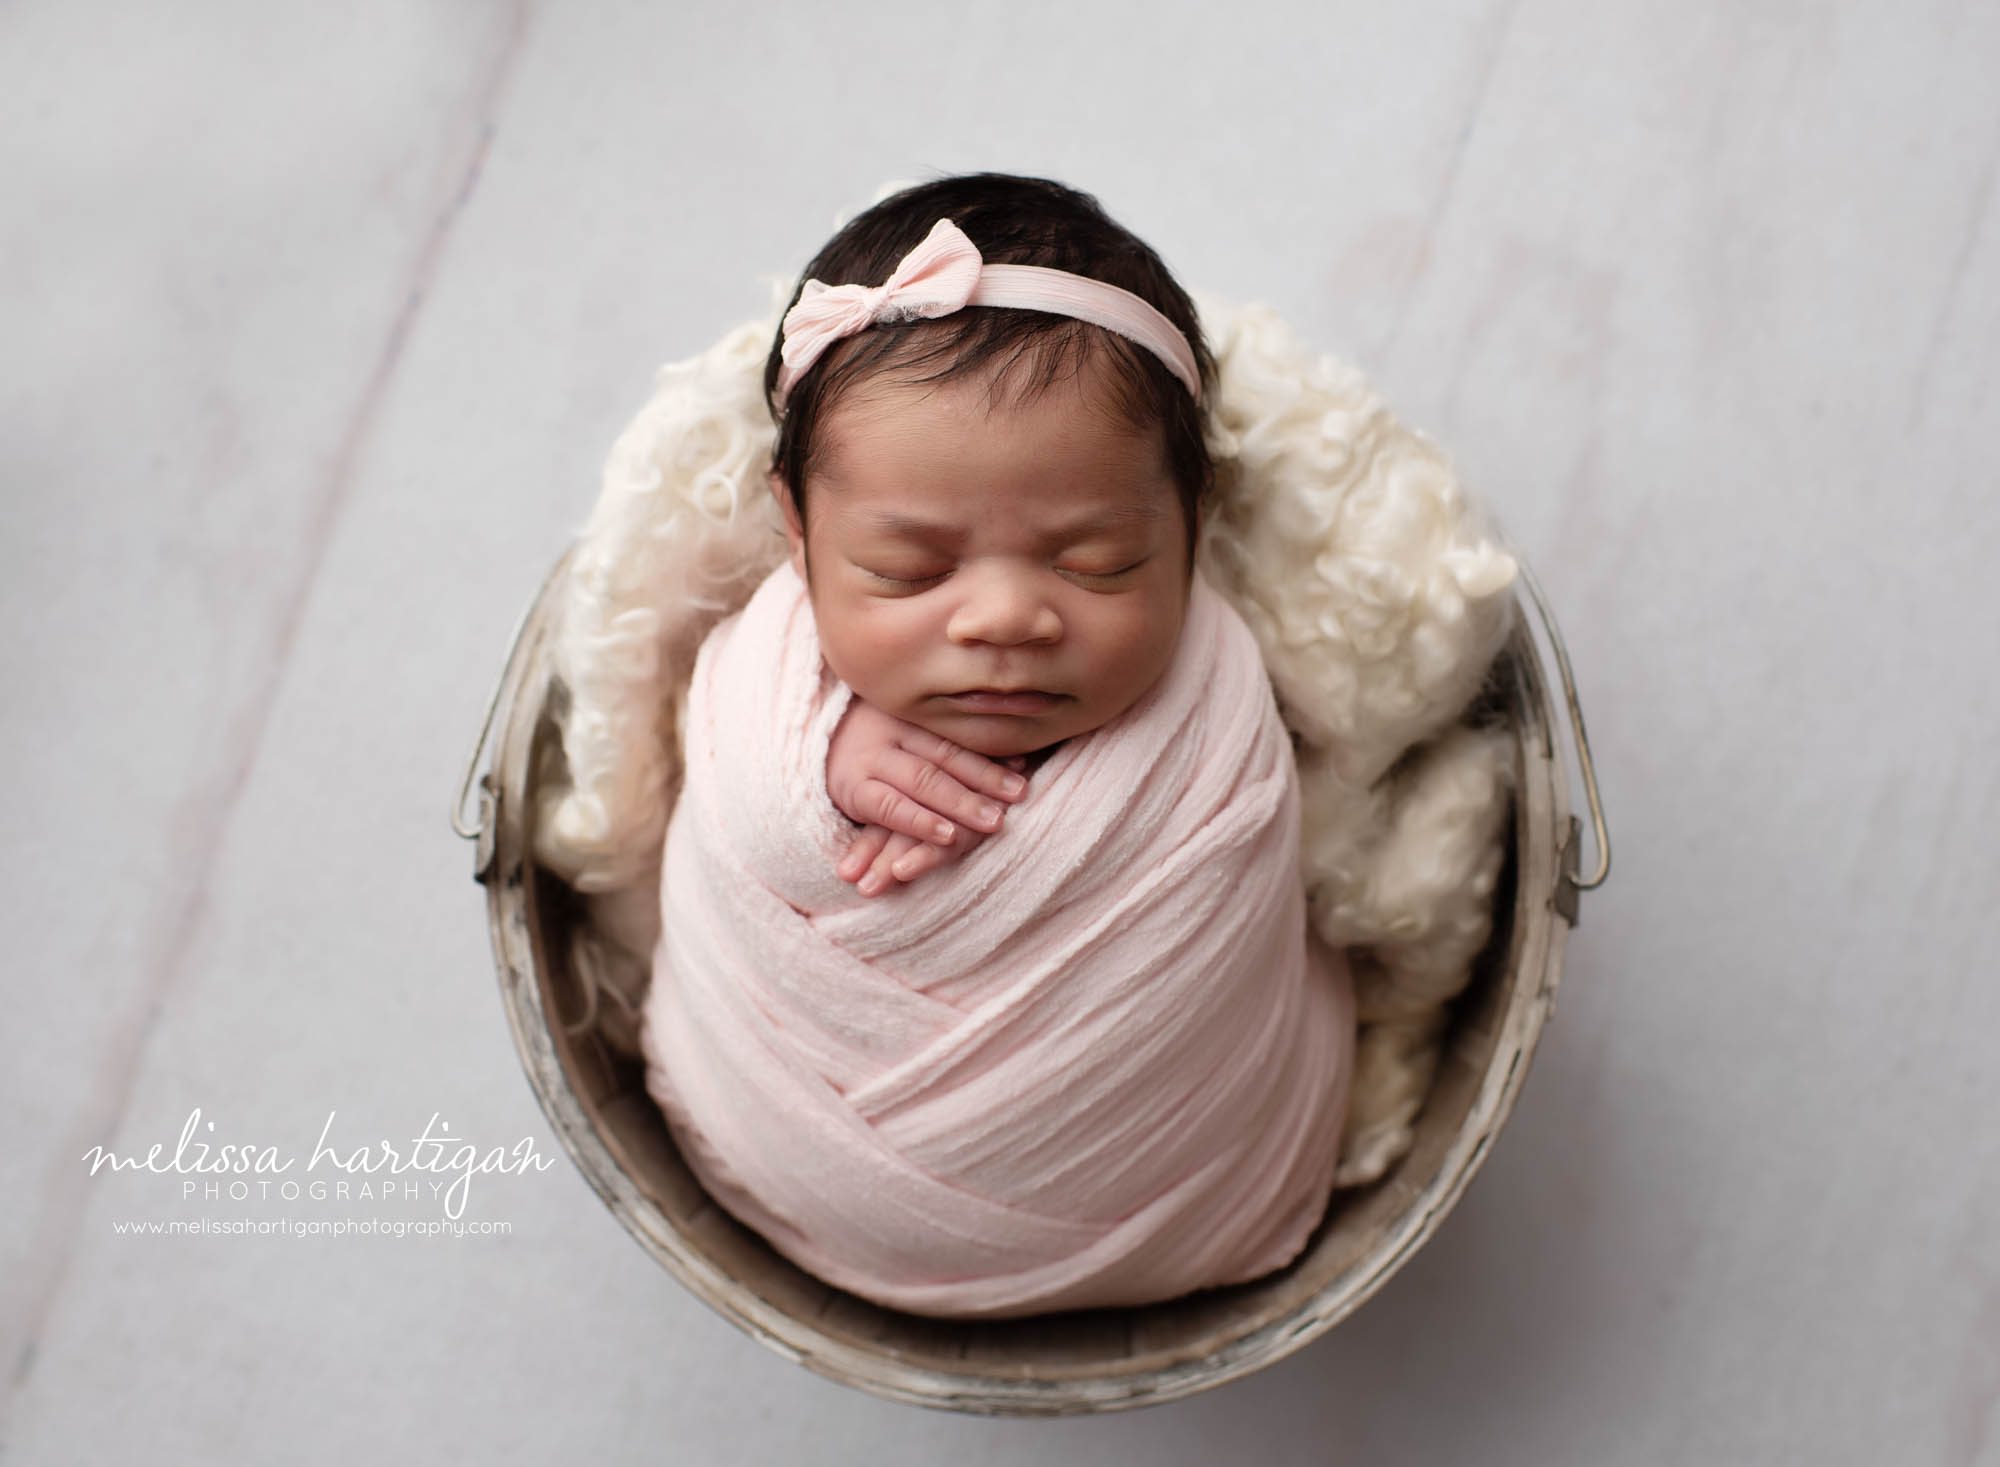 Baby girl wrapped in pink wrap with matching headband posed in bucket